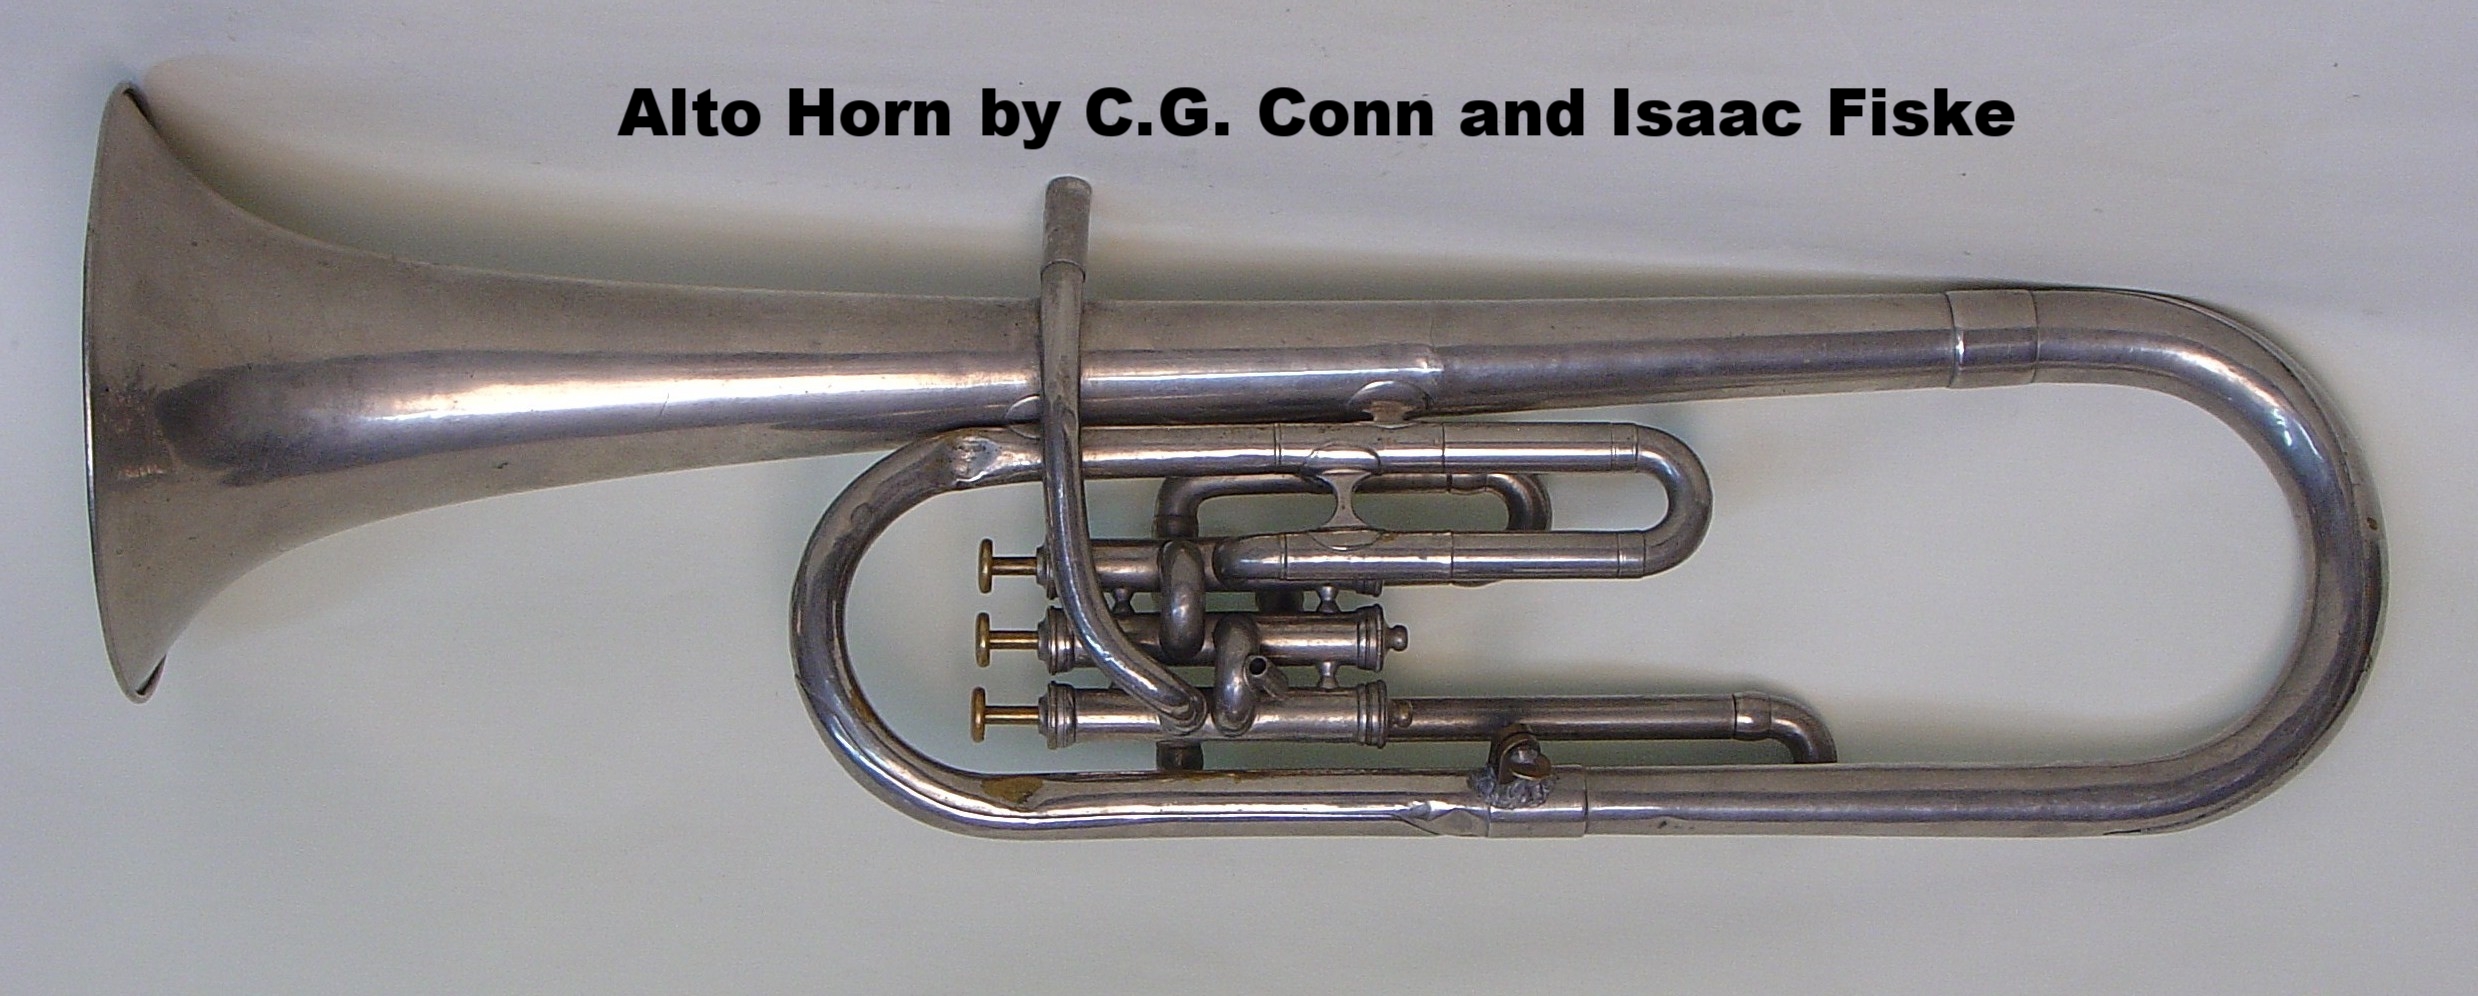 Alto Horn by C.G. Conn and Isaac Fiske